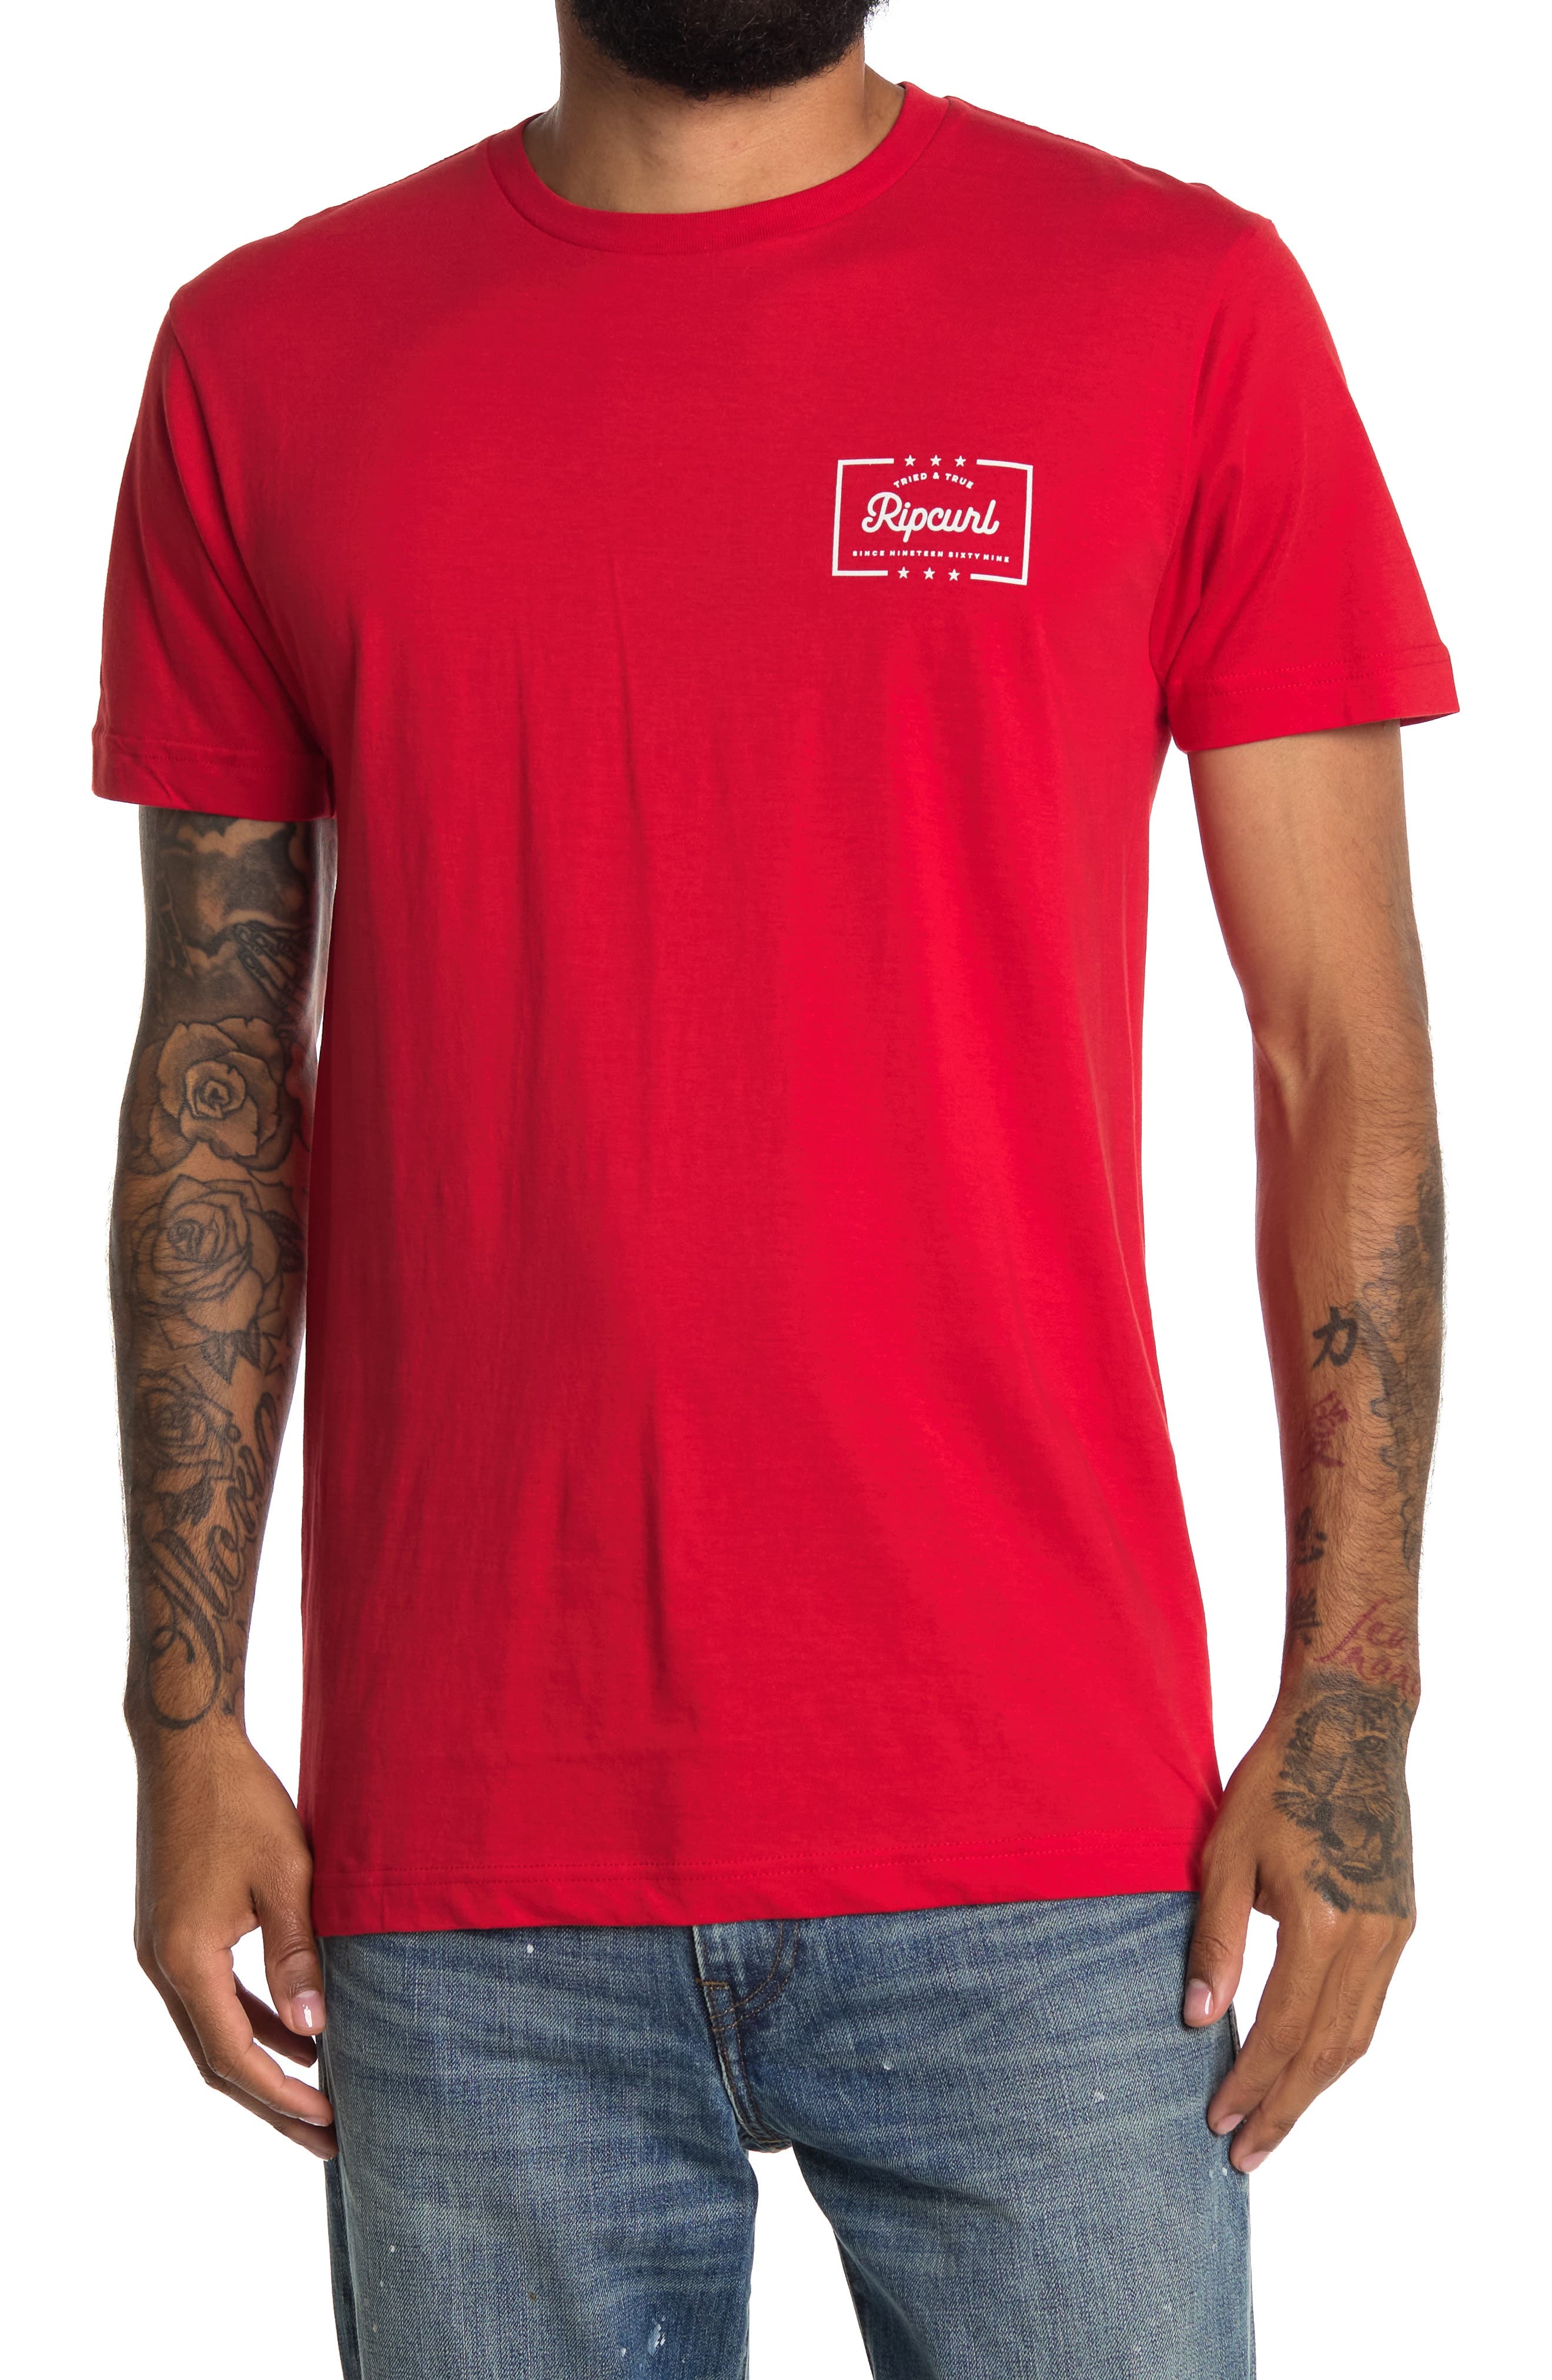 Men's RIP T-Shirts On Sale, Up To 70% Off | ModeSens